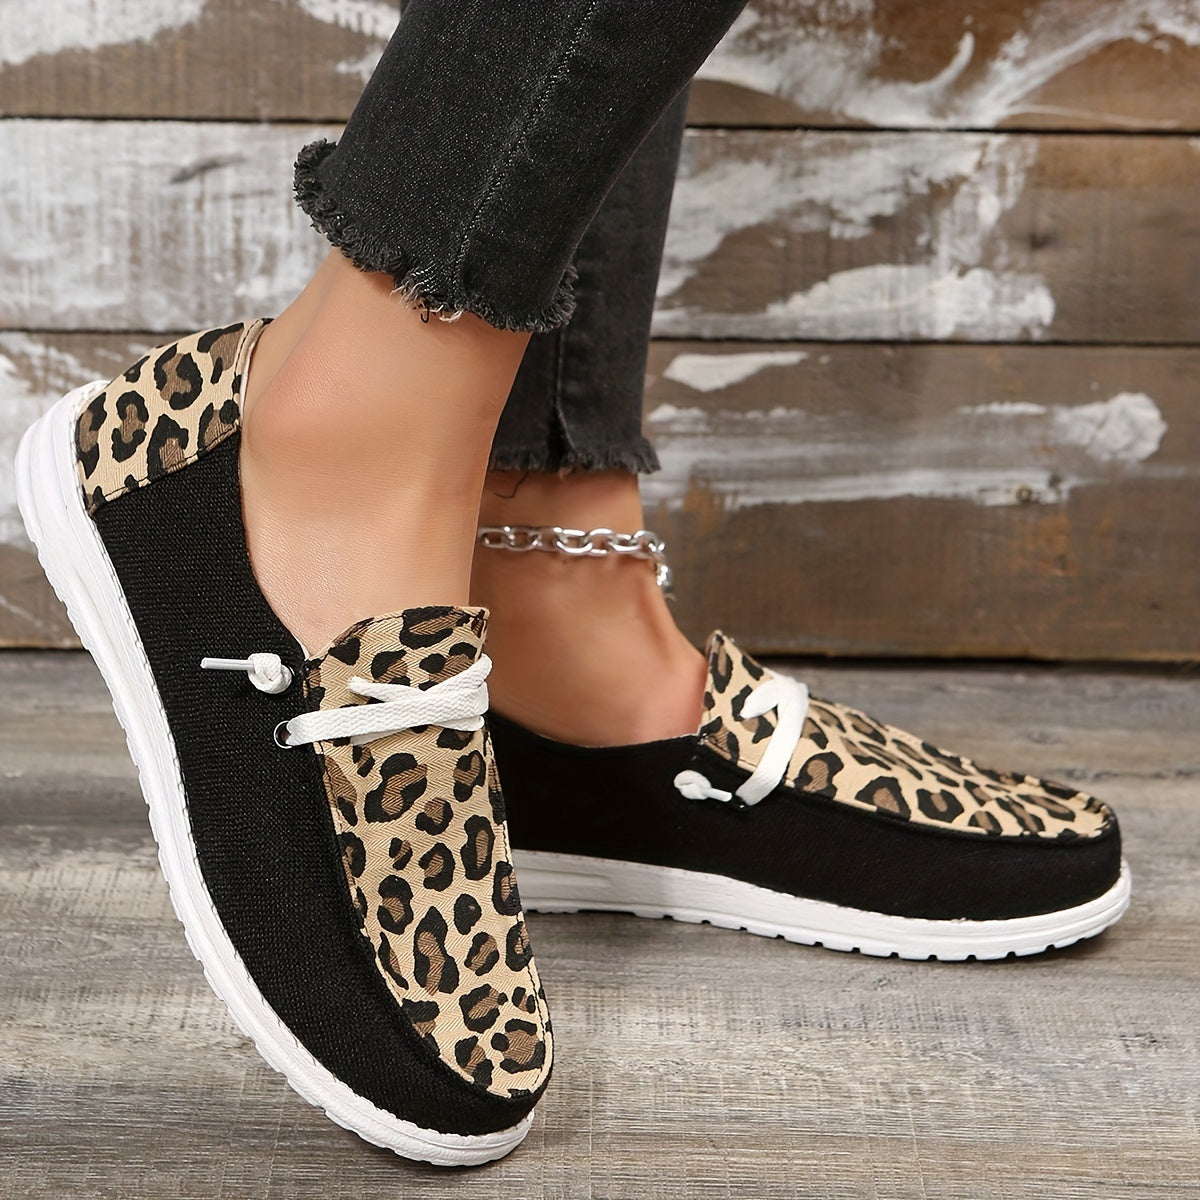 Leopard Printed Canvas Shoes, Casual Lace Up Sneakers